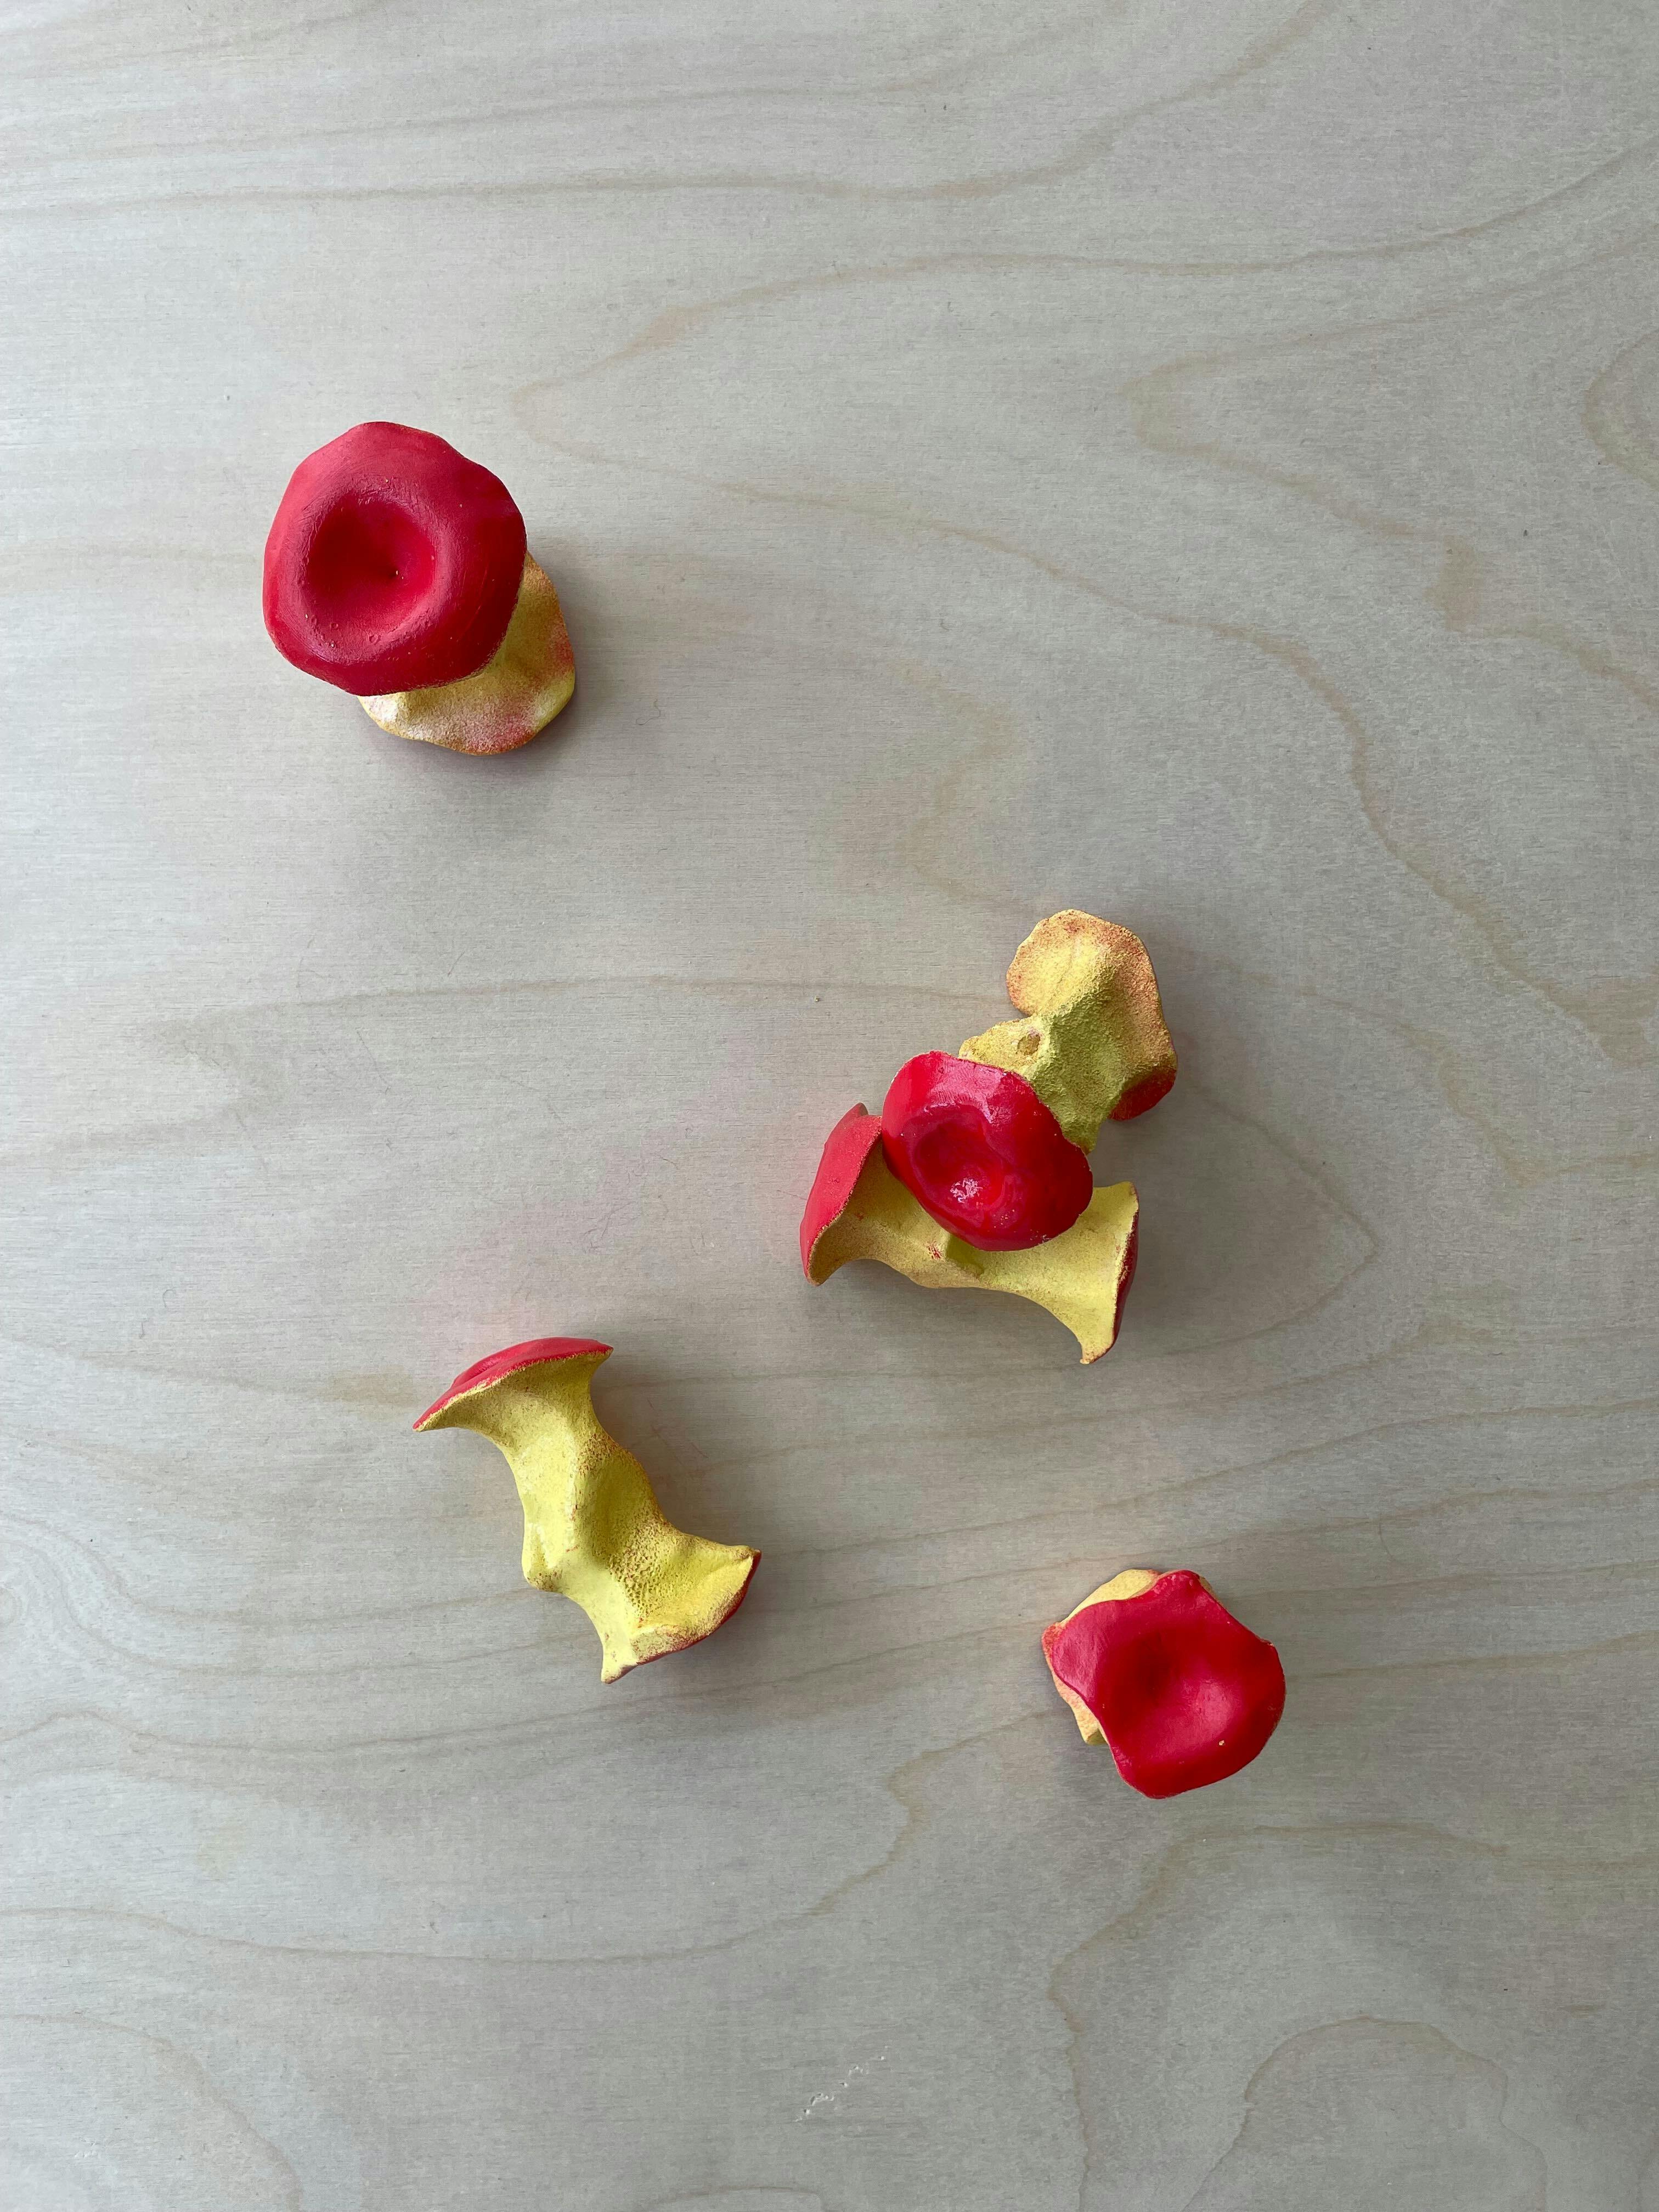 Five ceramic works that look like apple cores displayed on a bright wooden surface.